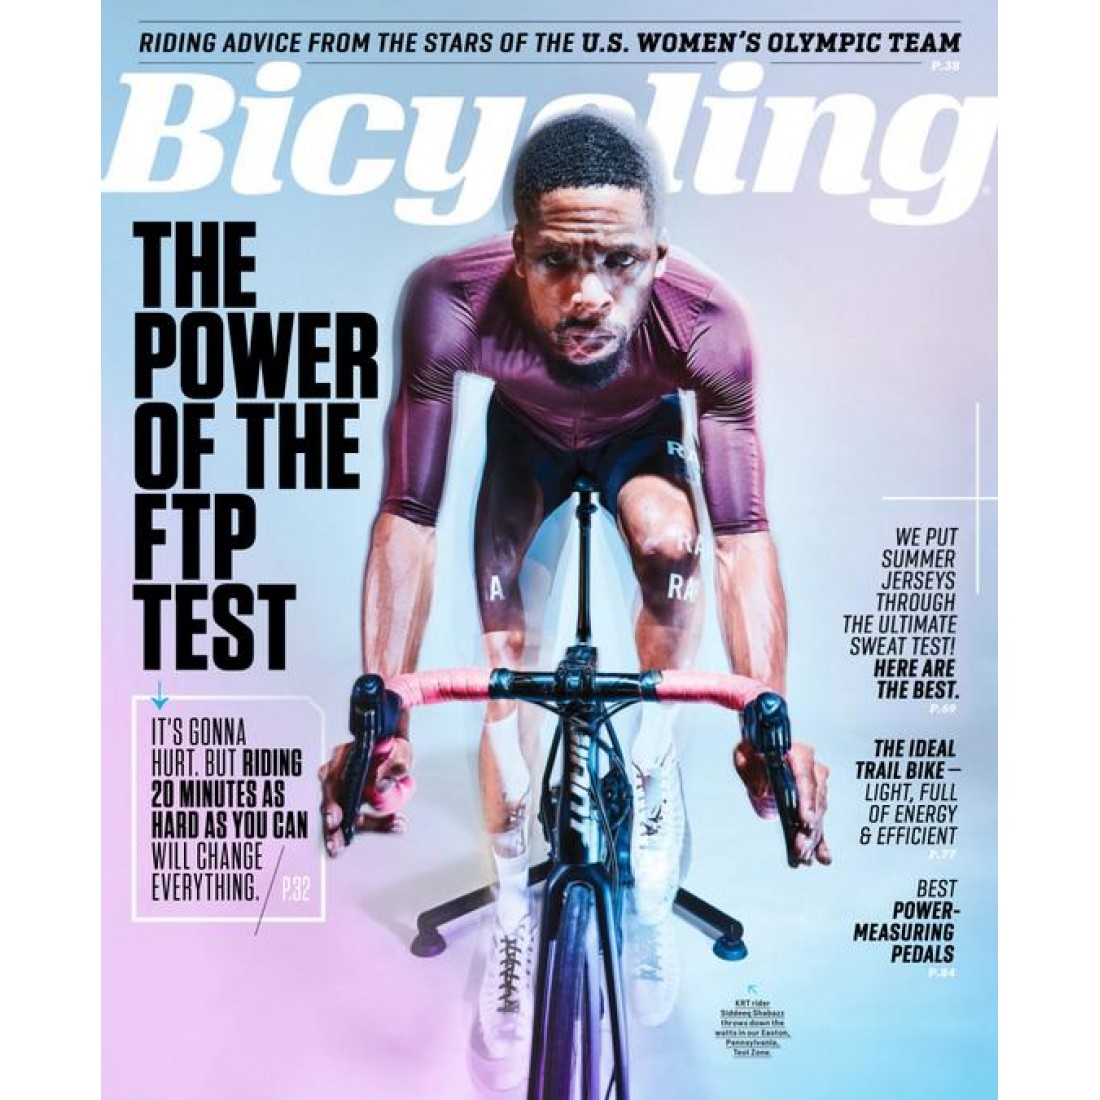 bicycling-magazine-subscriber-services